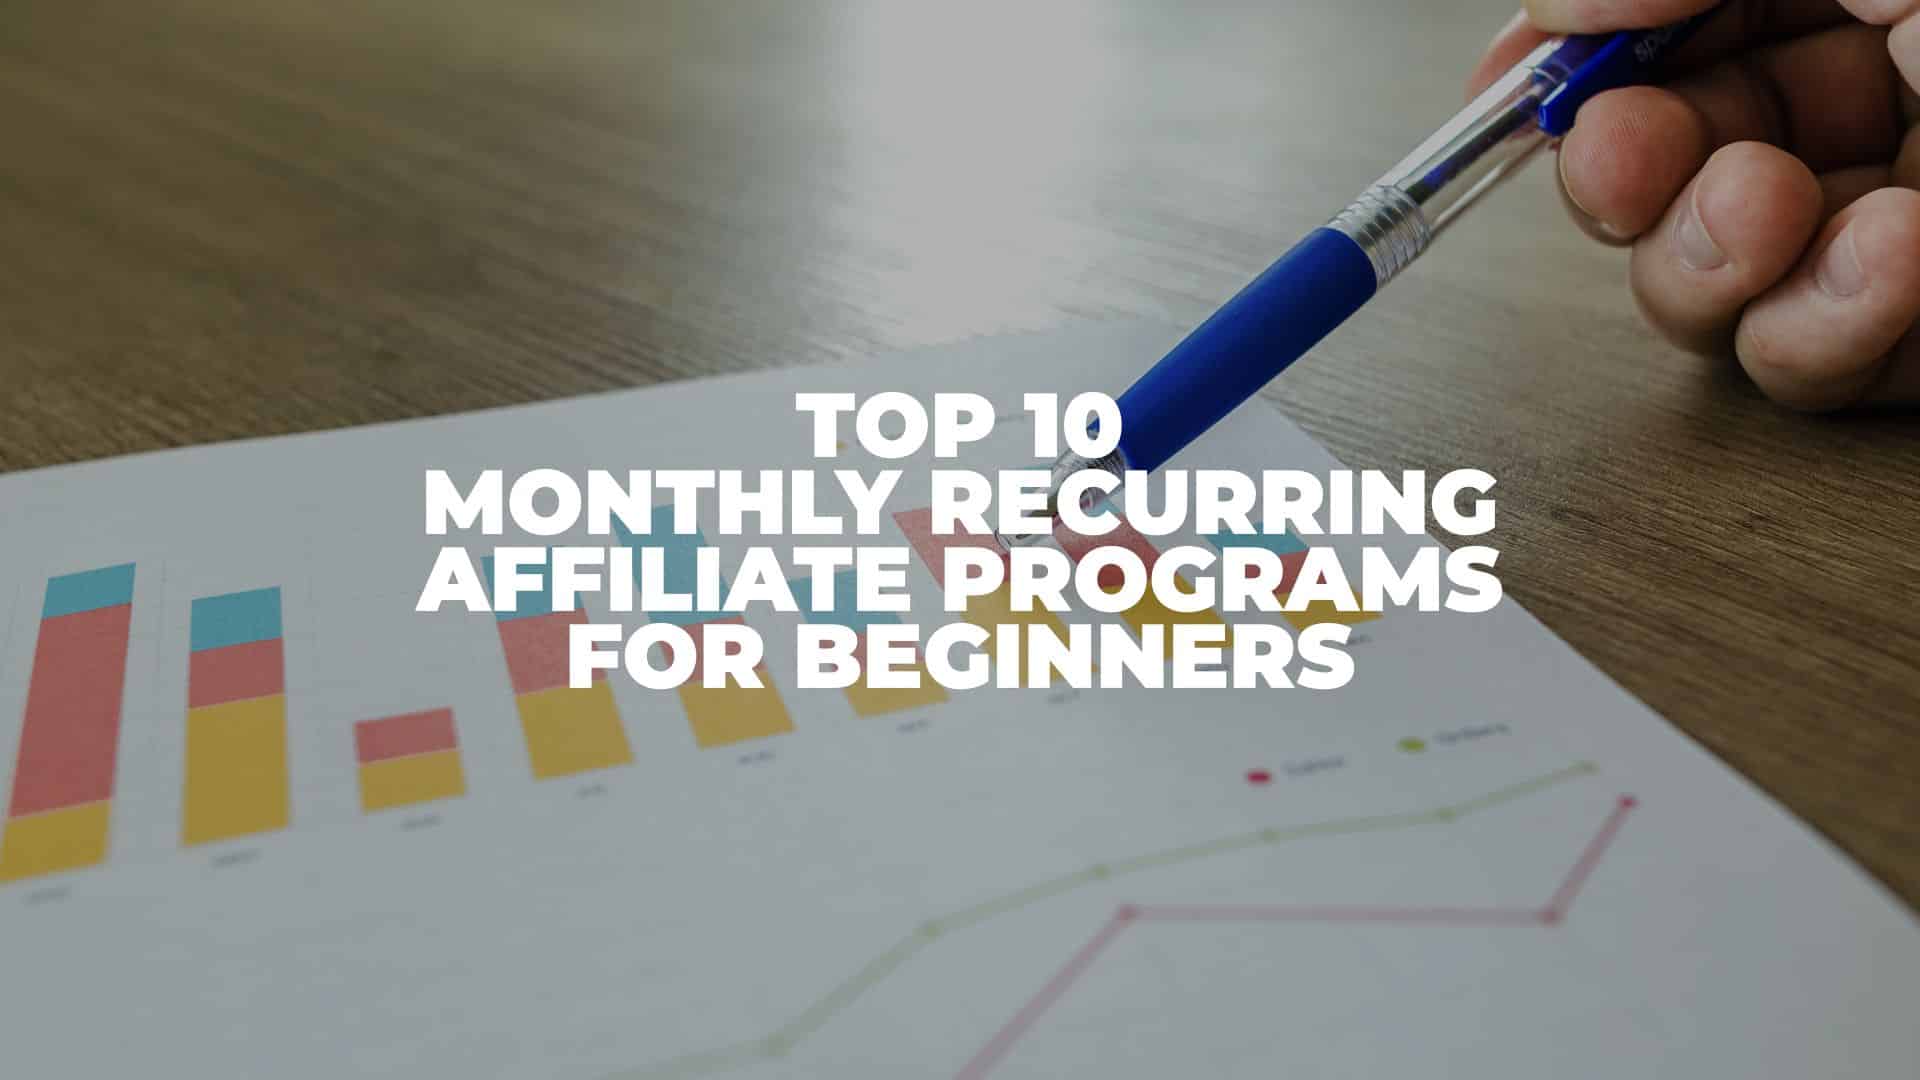 Top 10 Monthly Recurring Affiliate Programs For Beginners - Featured Image